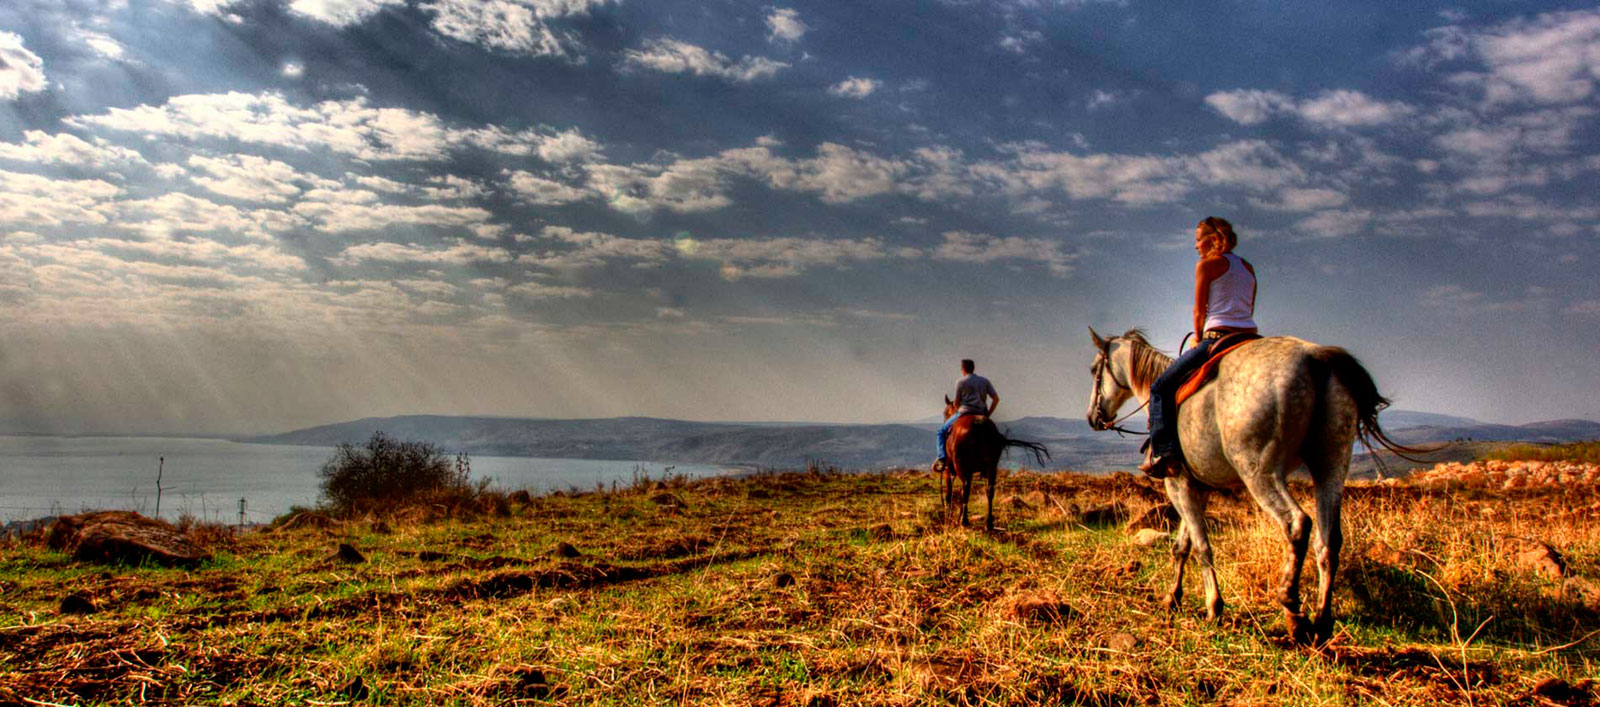 Equestrian Tourism in Israel